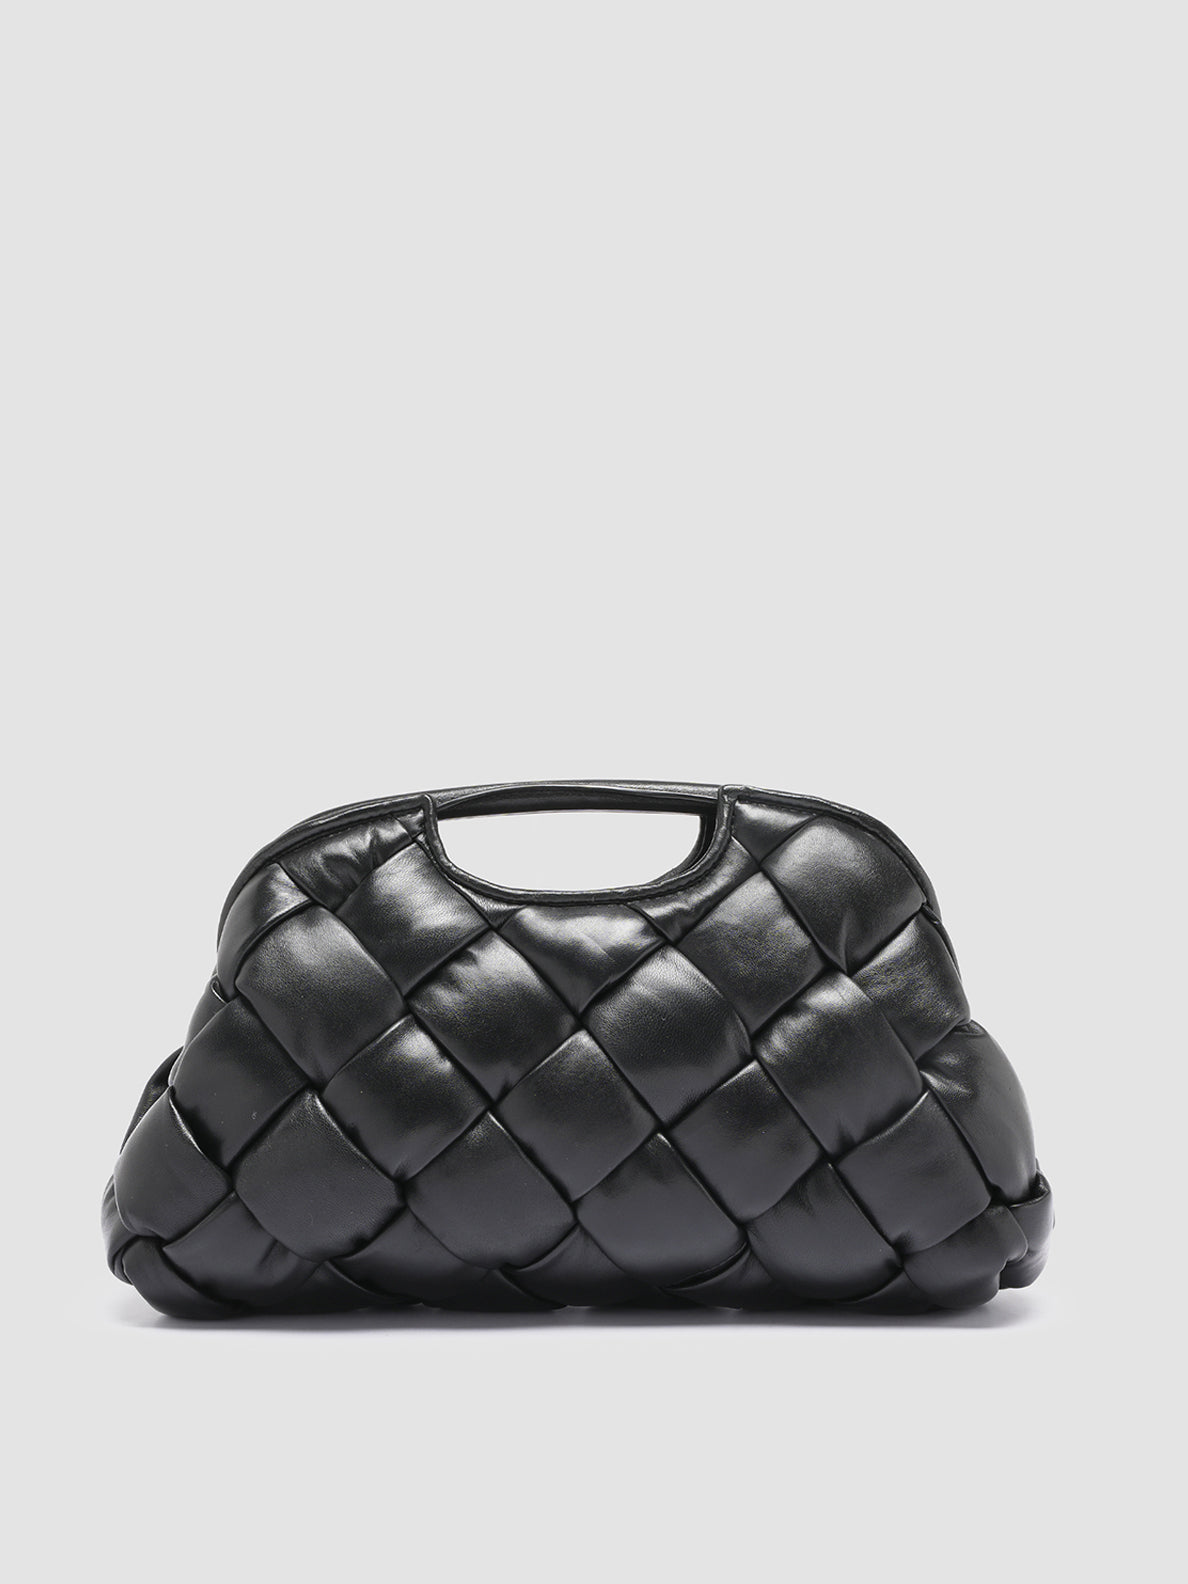 Chanel Off White Quilted Leather Expandable Zip Shoulder Bag